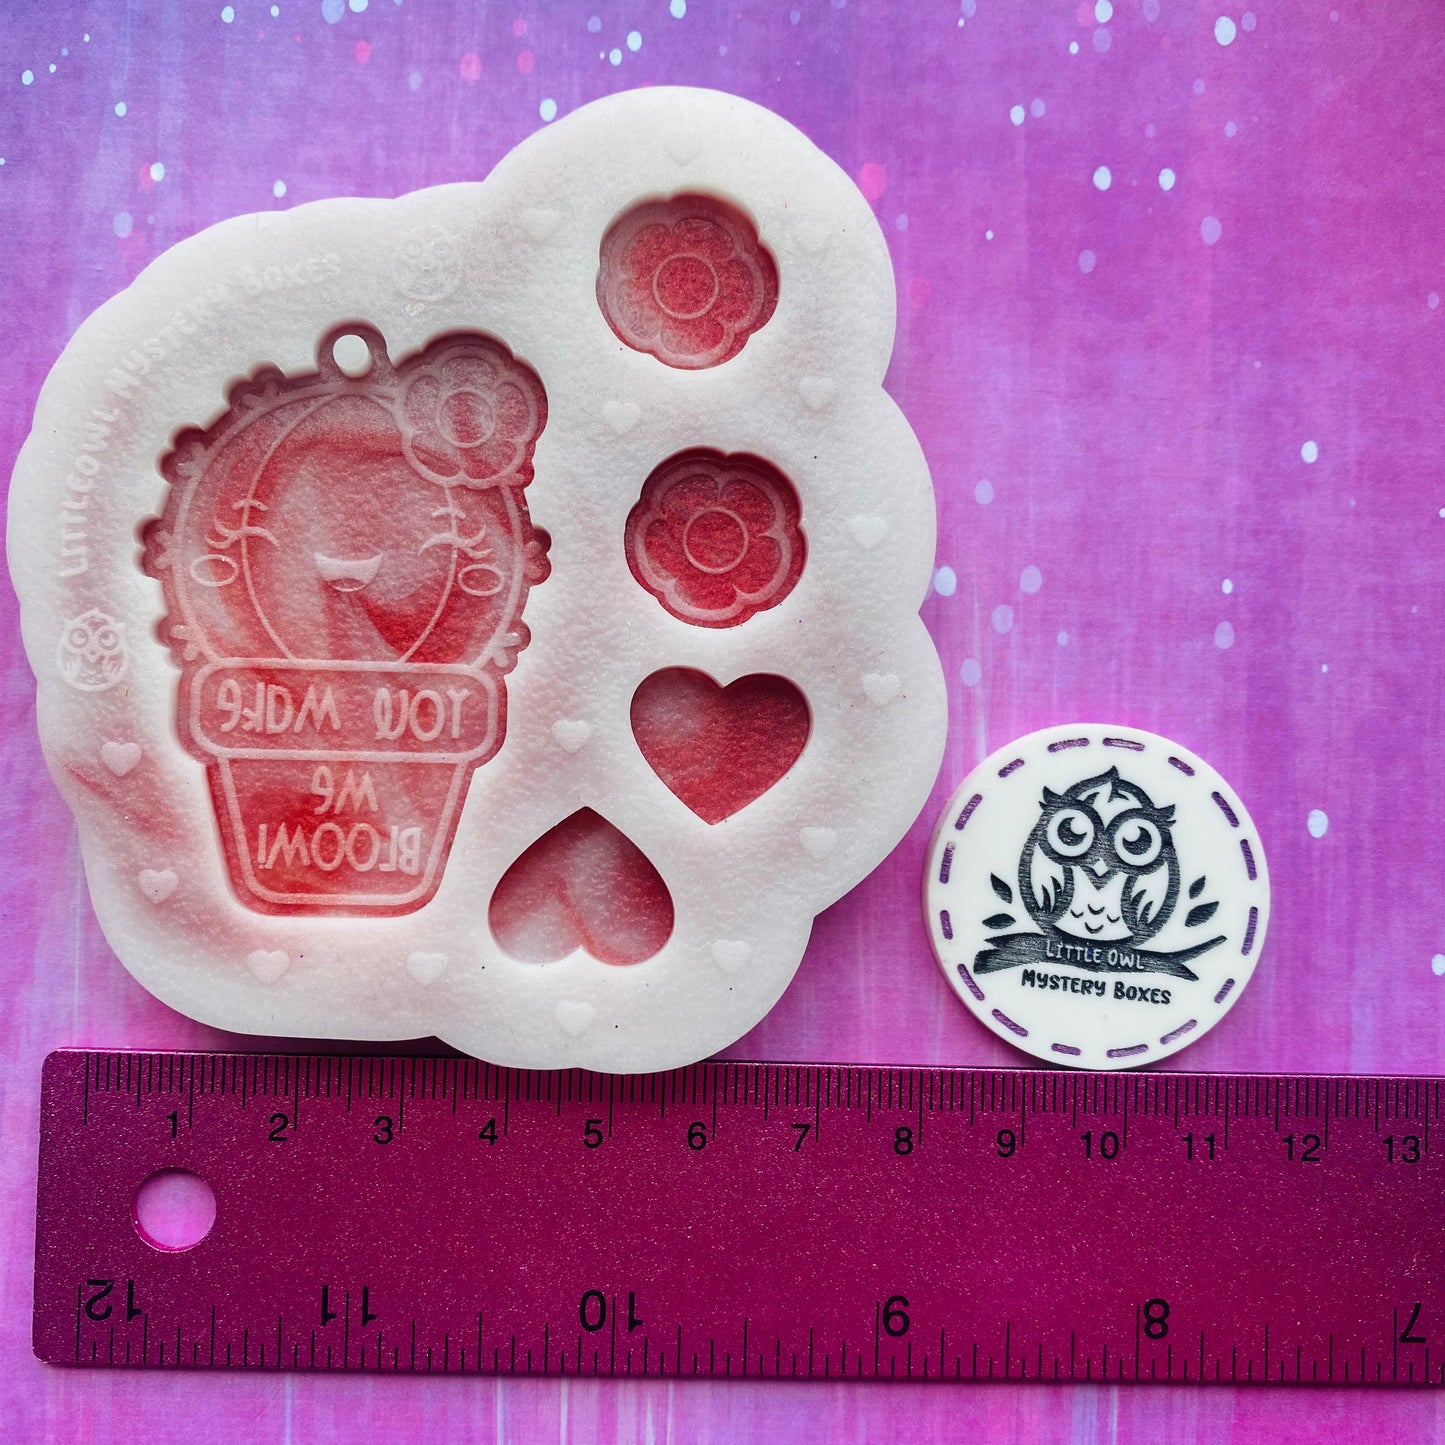 Little Owl Mould - Sweetheart Box Cactus Pendant and Studs